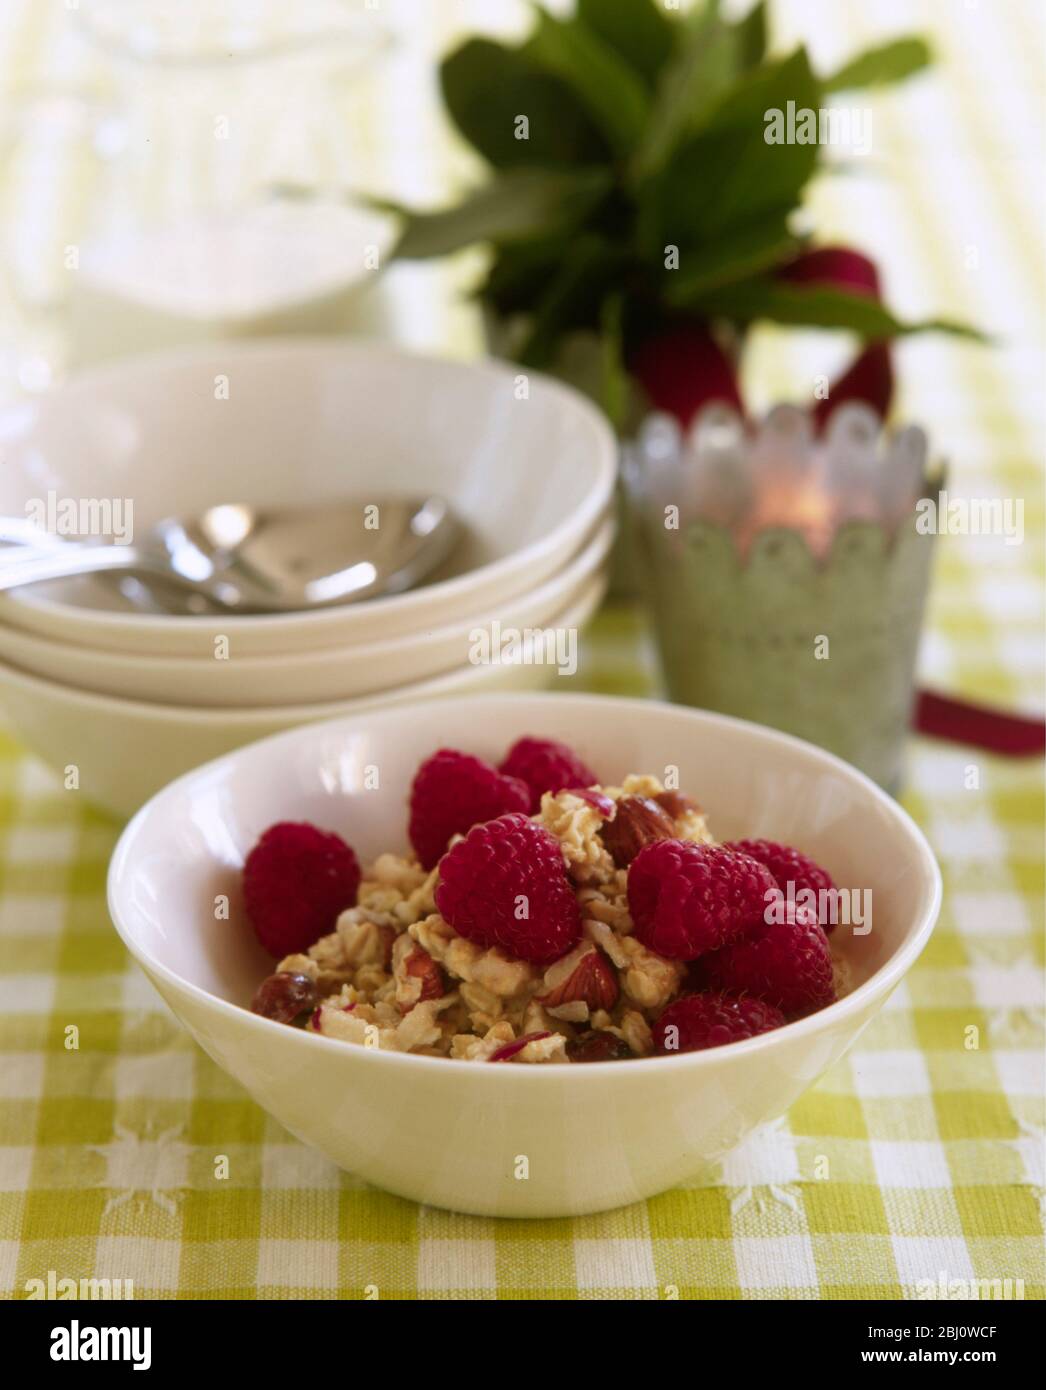 Breakfast of homemade granola with fresh raspberries on lime green gingham tablecloth - Stock Photo